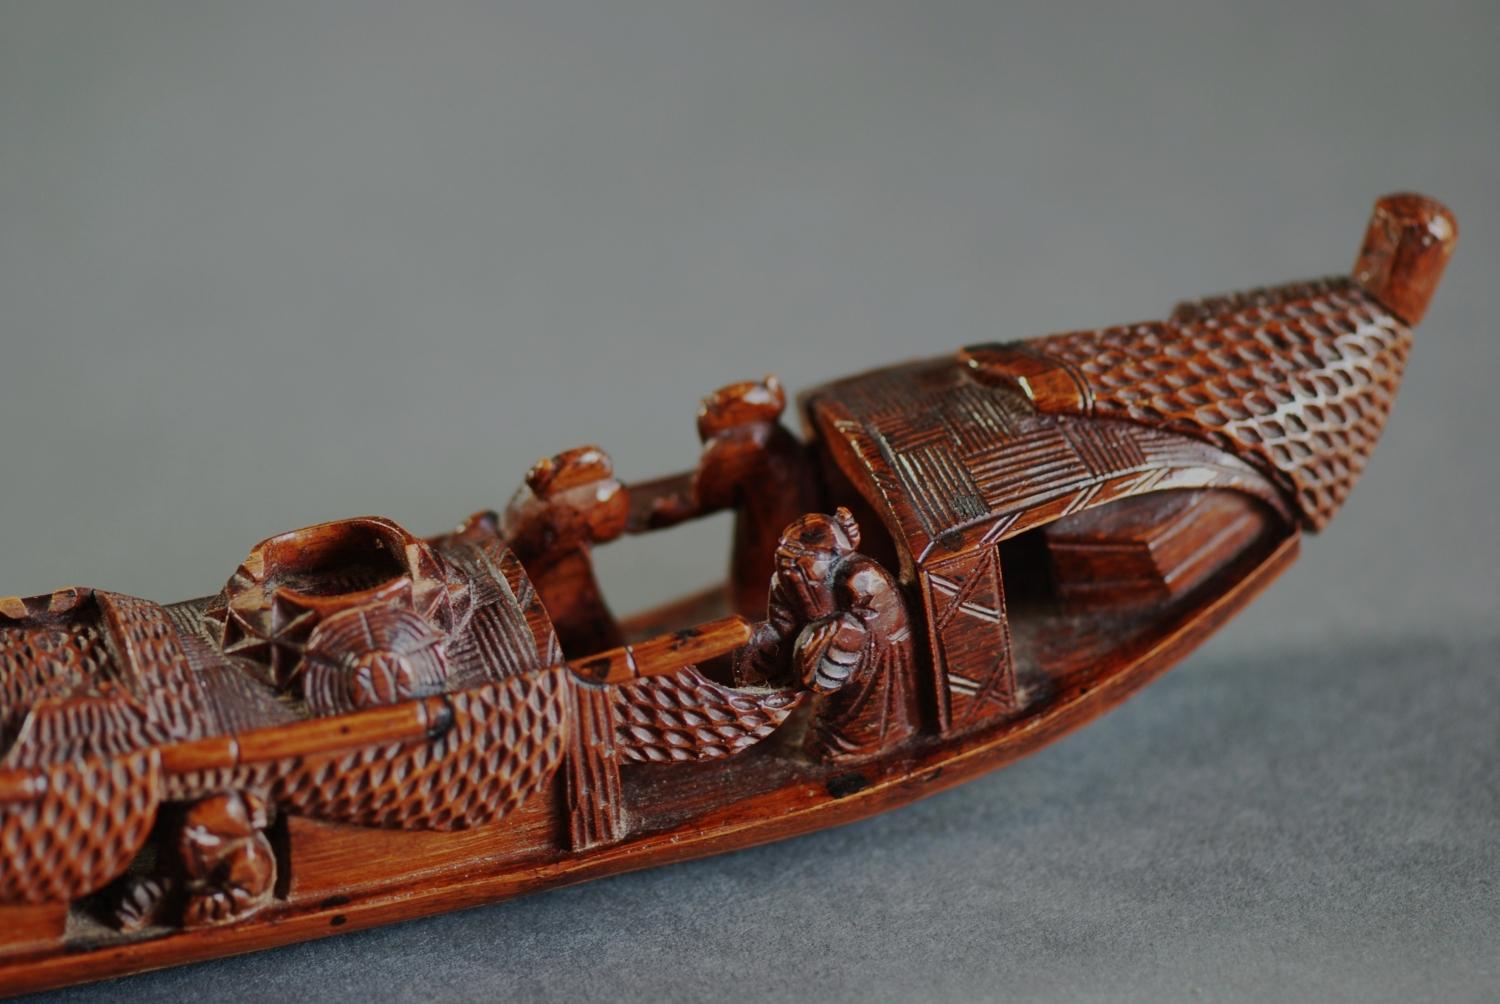 Chinese carved bamboo boat